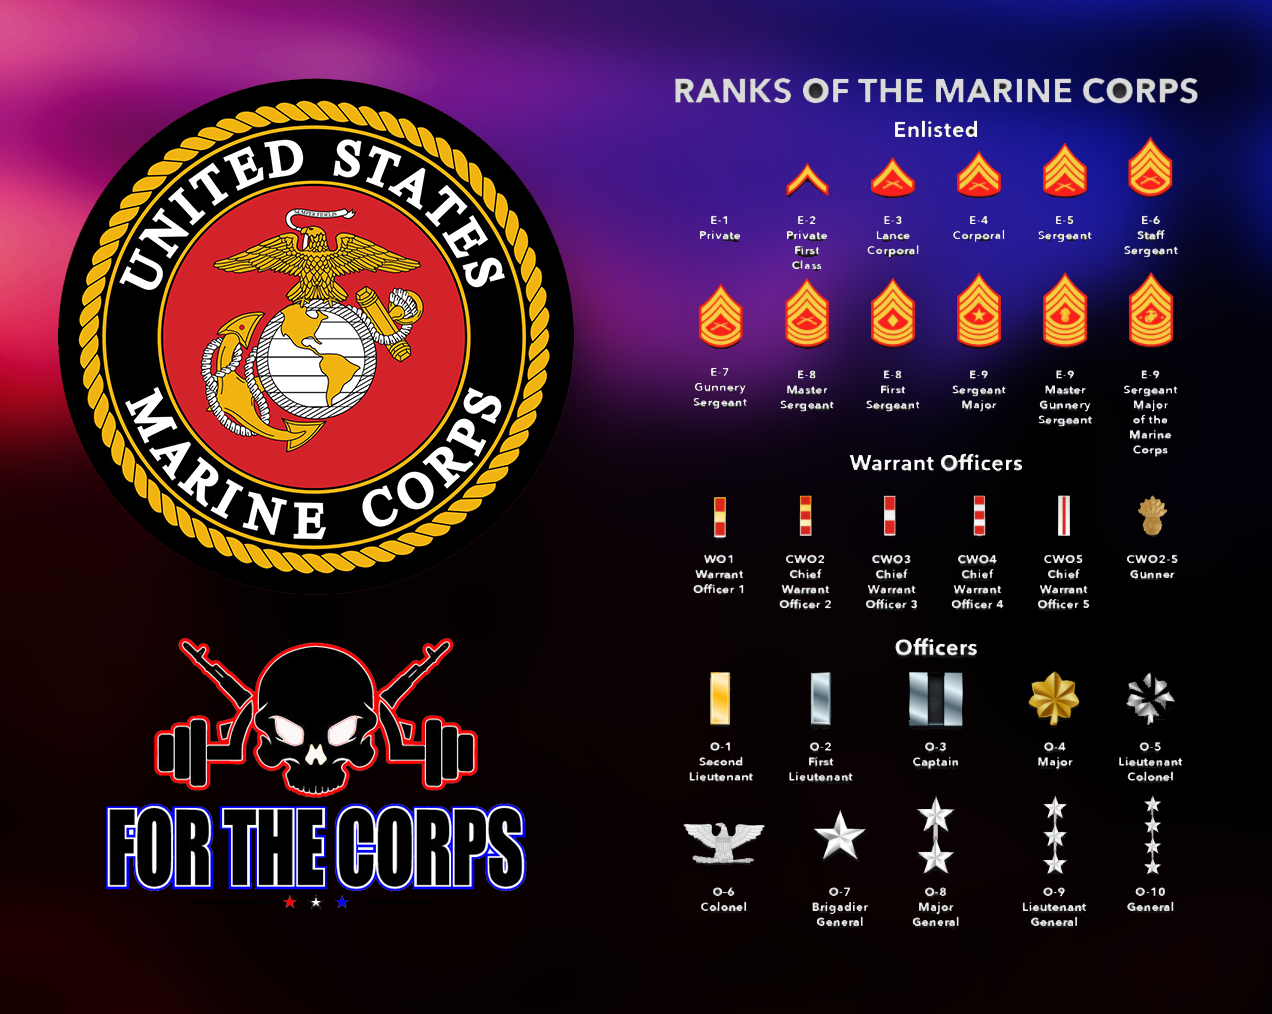 Usmc Ranks Usmc Ranks Marine Corps Ranks Marine Corps Rank Structure ...